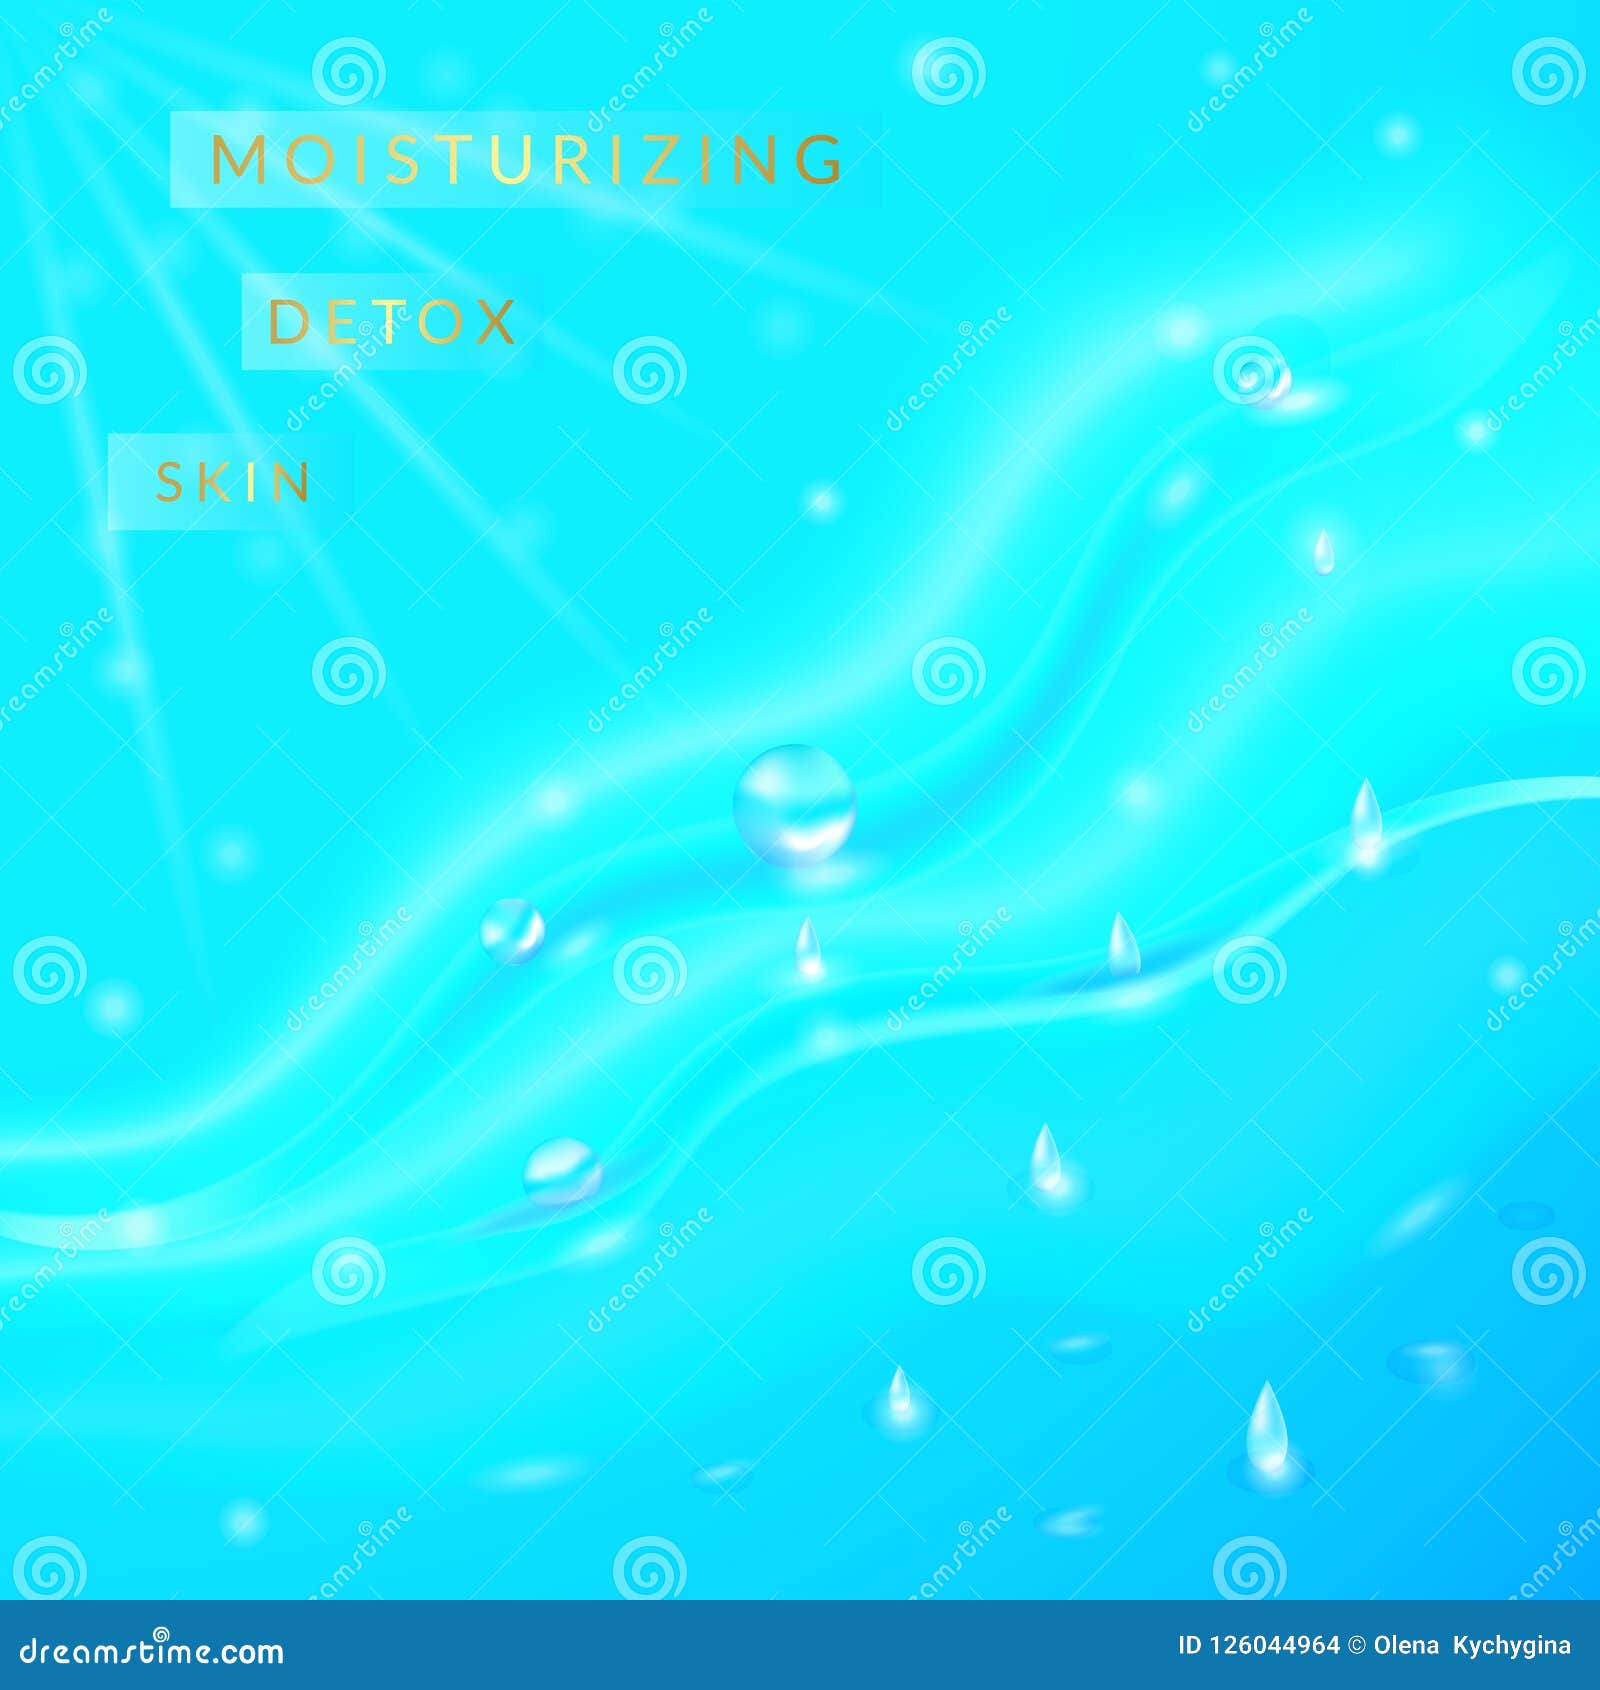 Vector Illustration Background With Flows And Drops Of Crystal